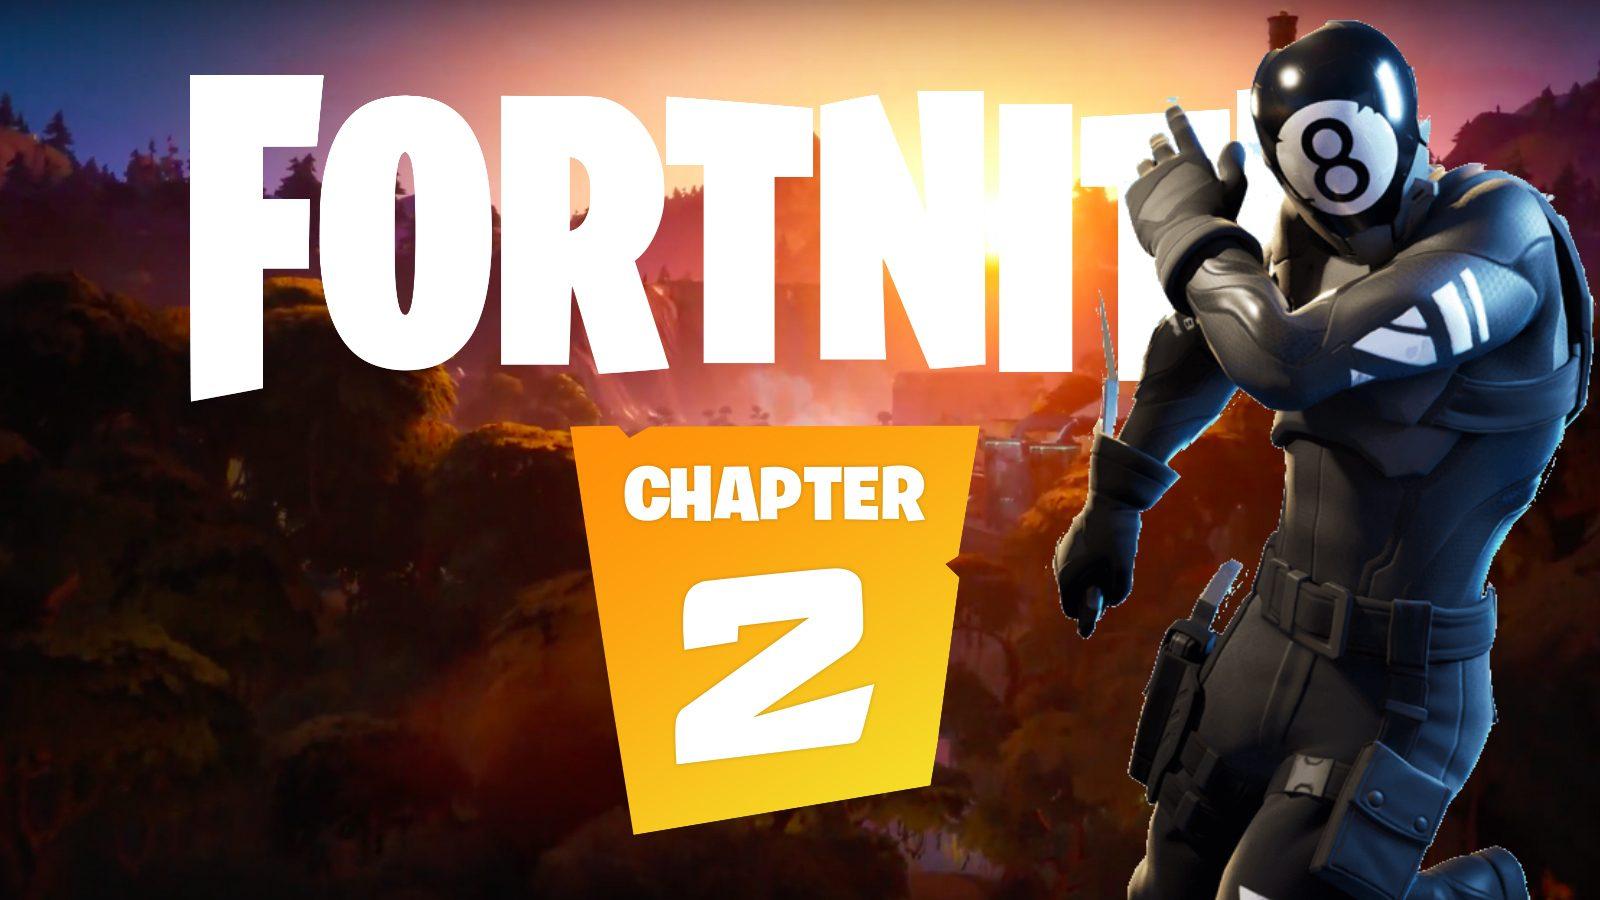 Fortnite Chapter 2 Feats: all challenges leaked